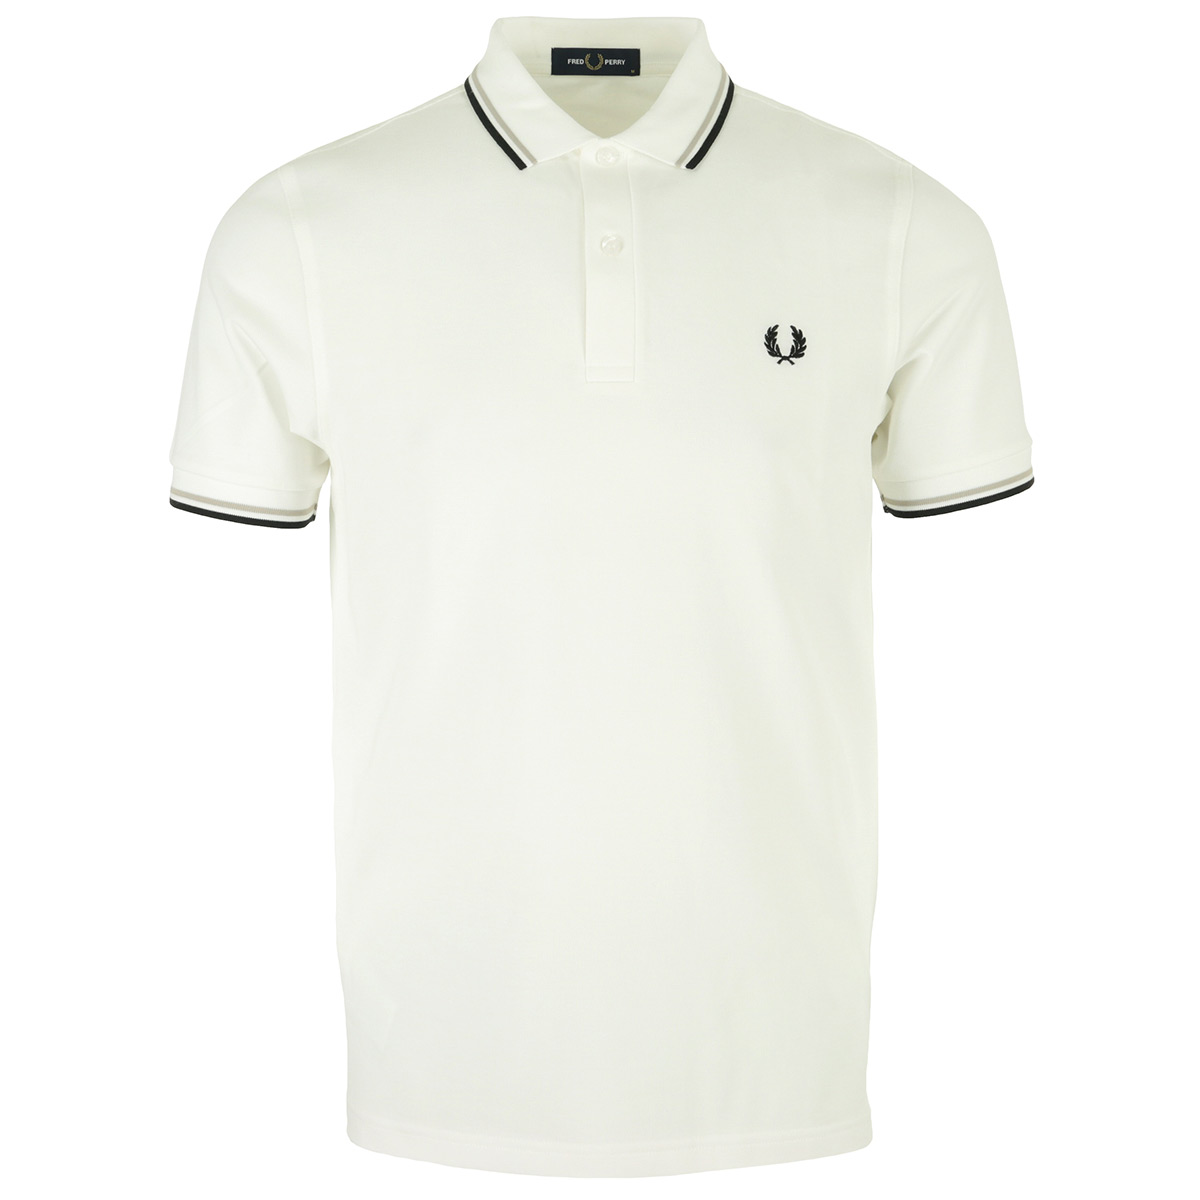 Fred Perry "Twin Tipped Shirt"